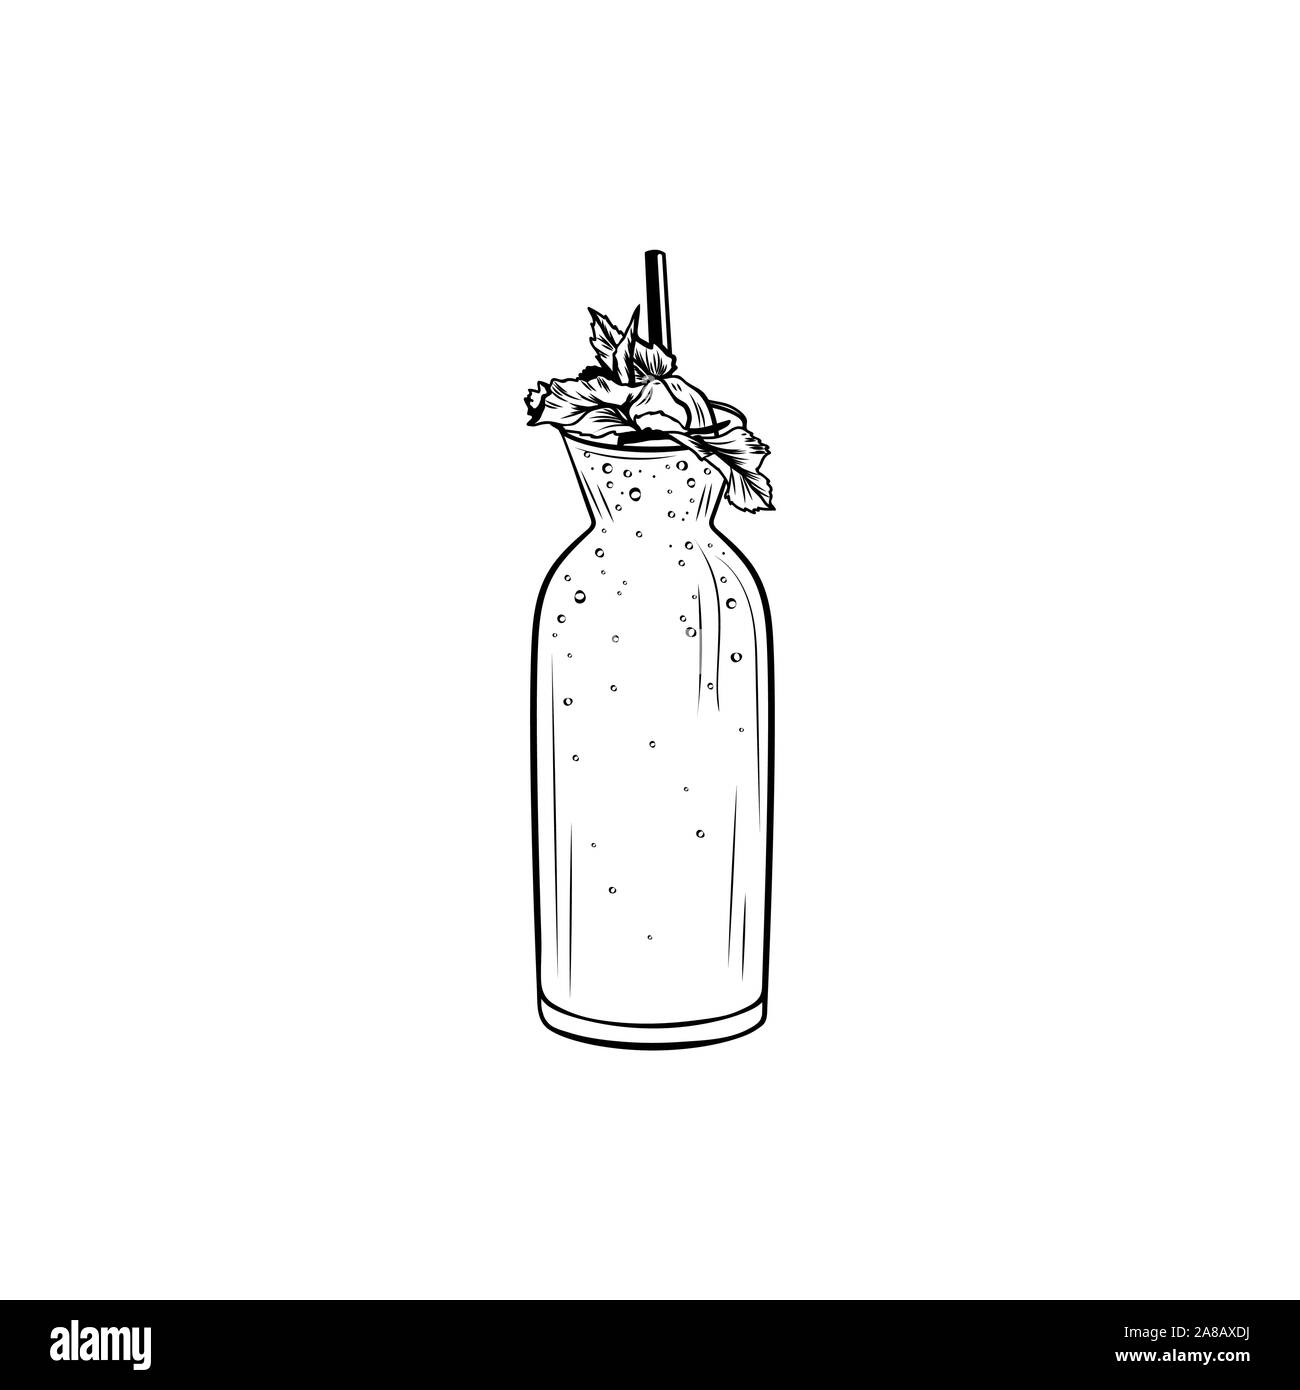 Bubble tea black and white vector illustration. Healthy summer refreshment, delicious taiwan drink ink pen outline drawing. Fresh beverage, sweet cocktail. Glass bottle with mint leaves and straw Stock Vector